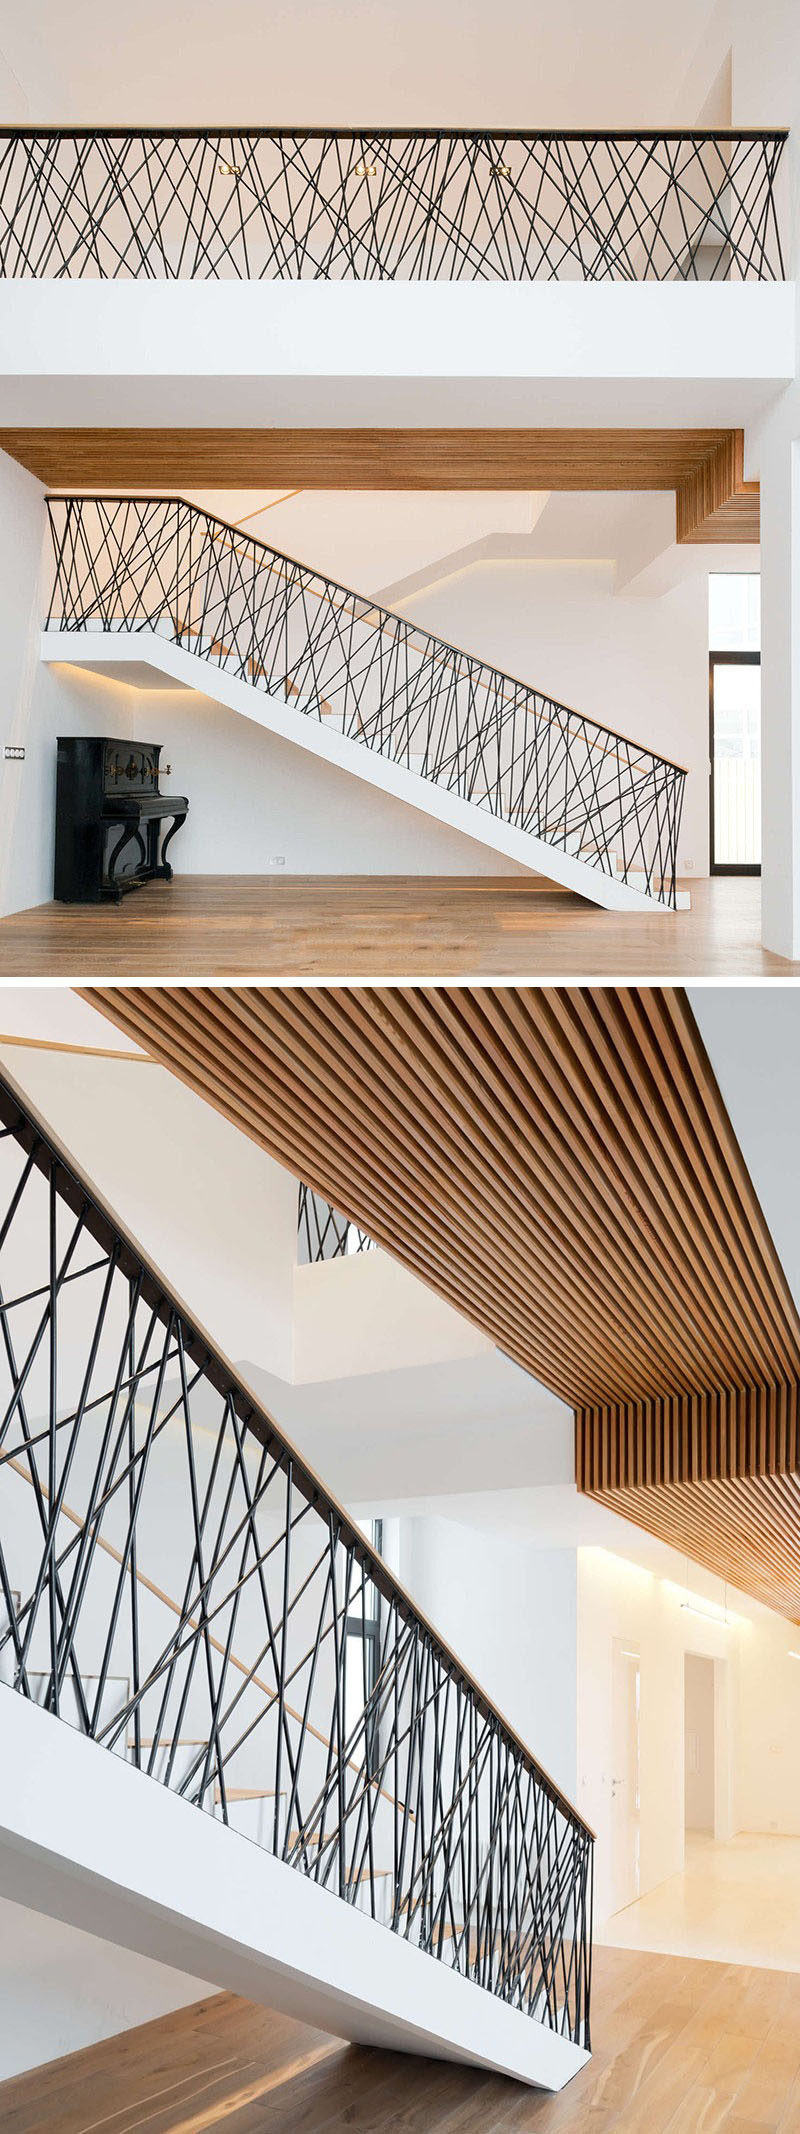 Randomly arranged steel rods have been placed on the railings of these stairs to both protect and act as a focal point in the home.